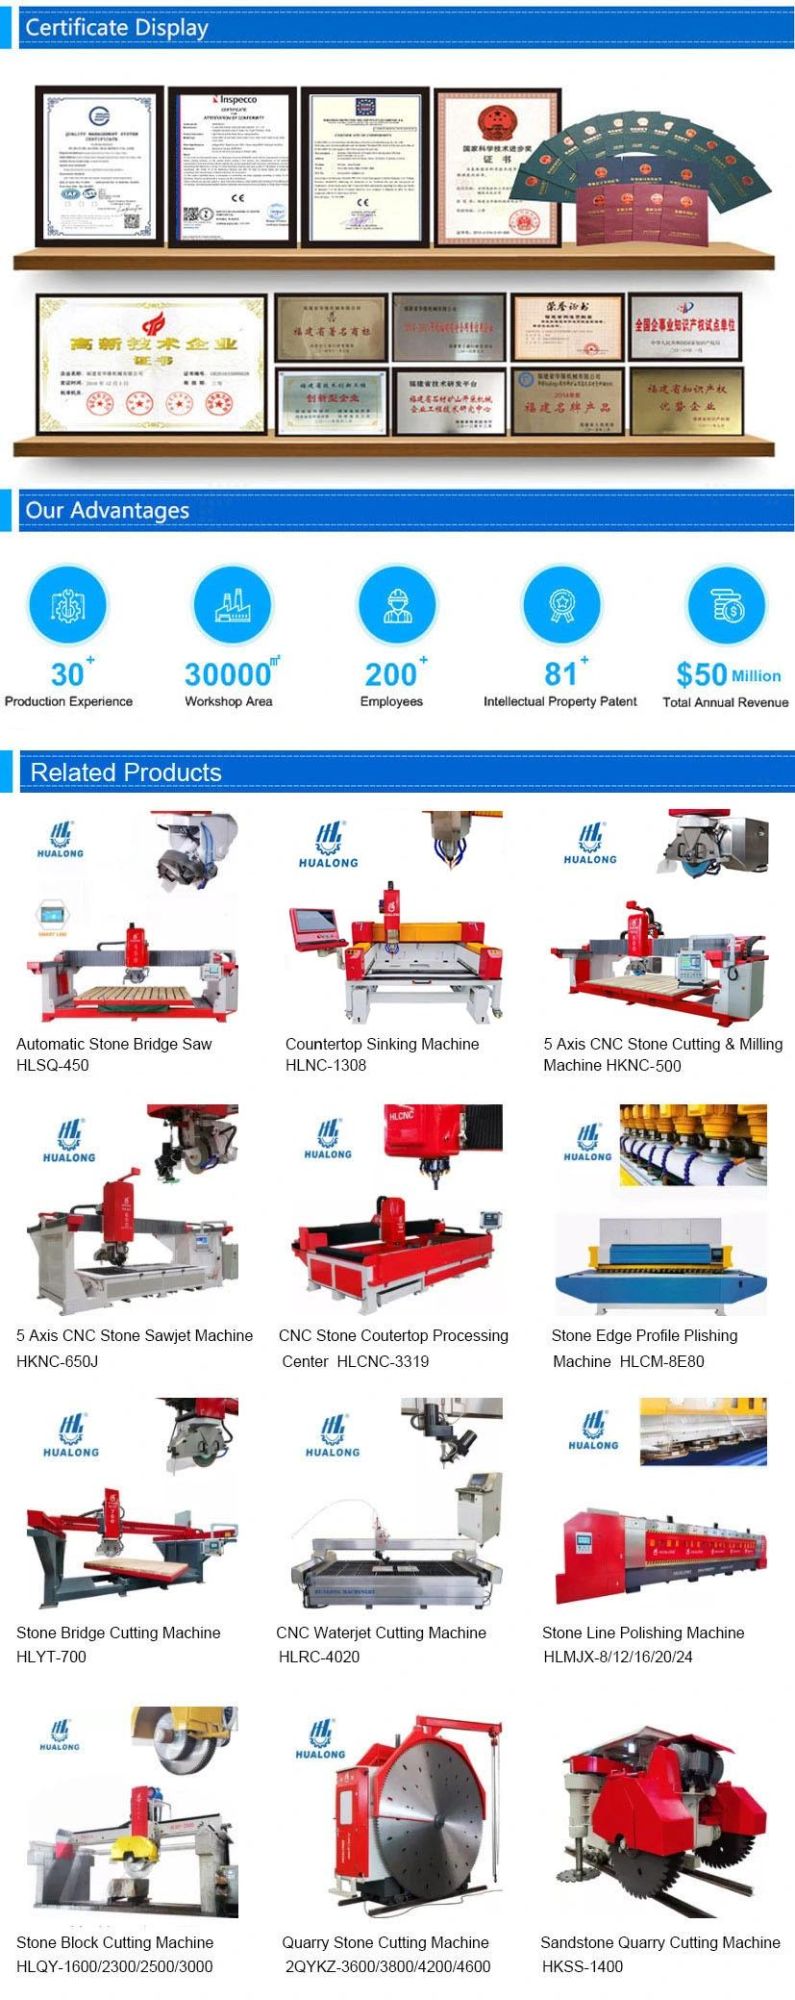 Hualong Machinery Hlrc-4020 5 Axis Stone Glass Metal CNC Water Jet Waterjet Cutting Machine for Granite Marble Tile Steel Leather Countertop with High Pressure